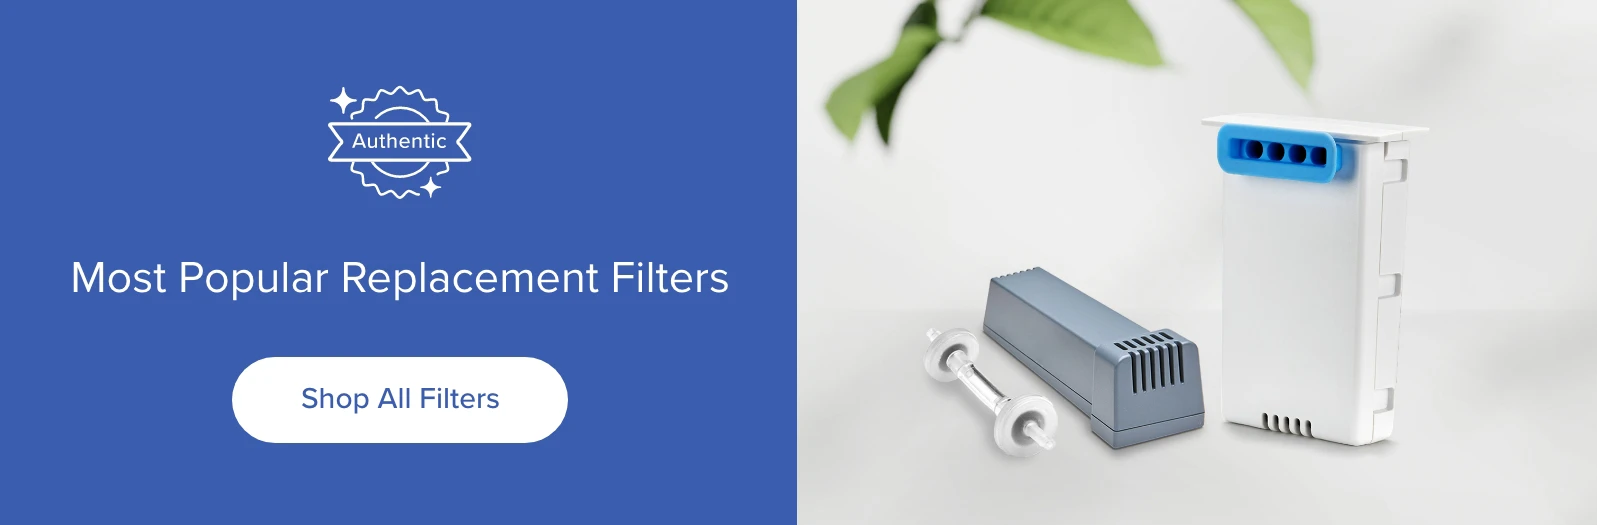 Replacement Filters for SoClean Devices.